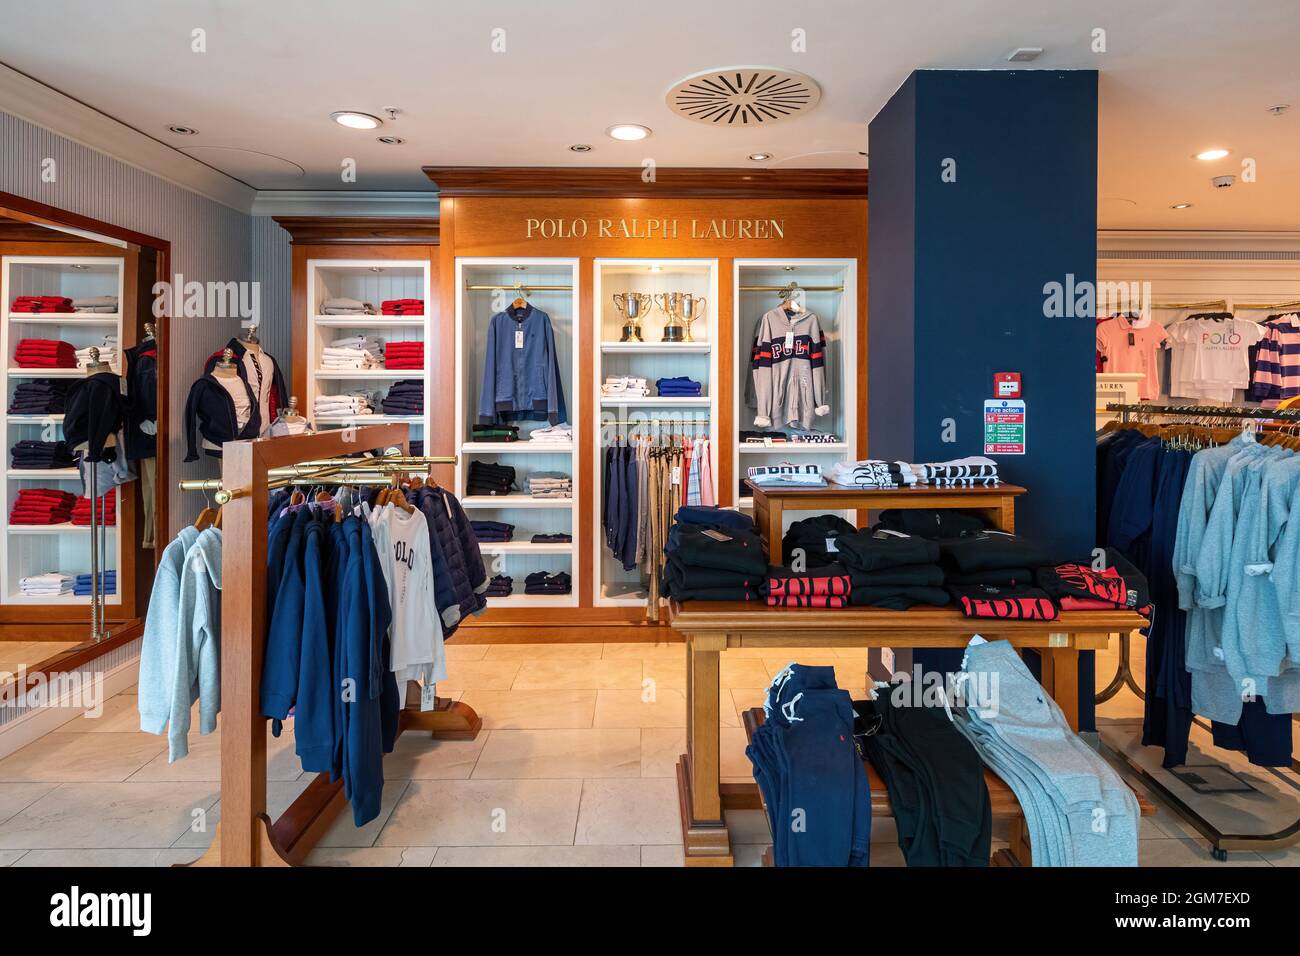 Ralph lauren display hi-res stock photography and images - Alamy